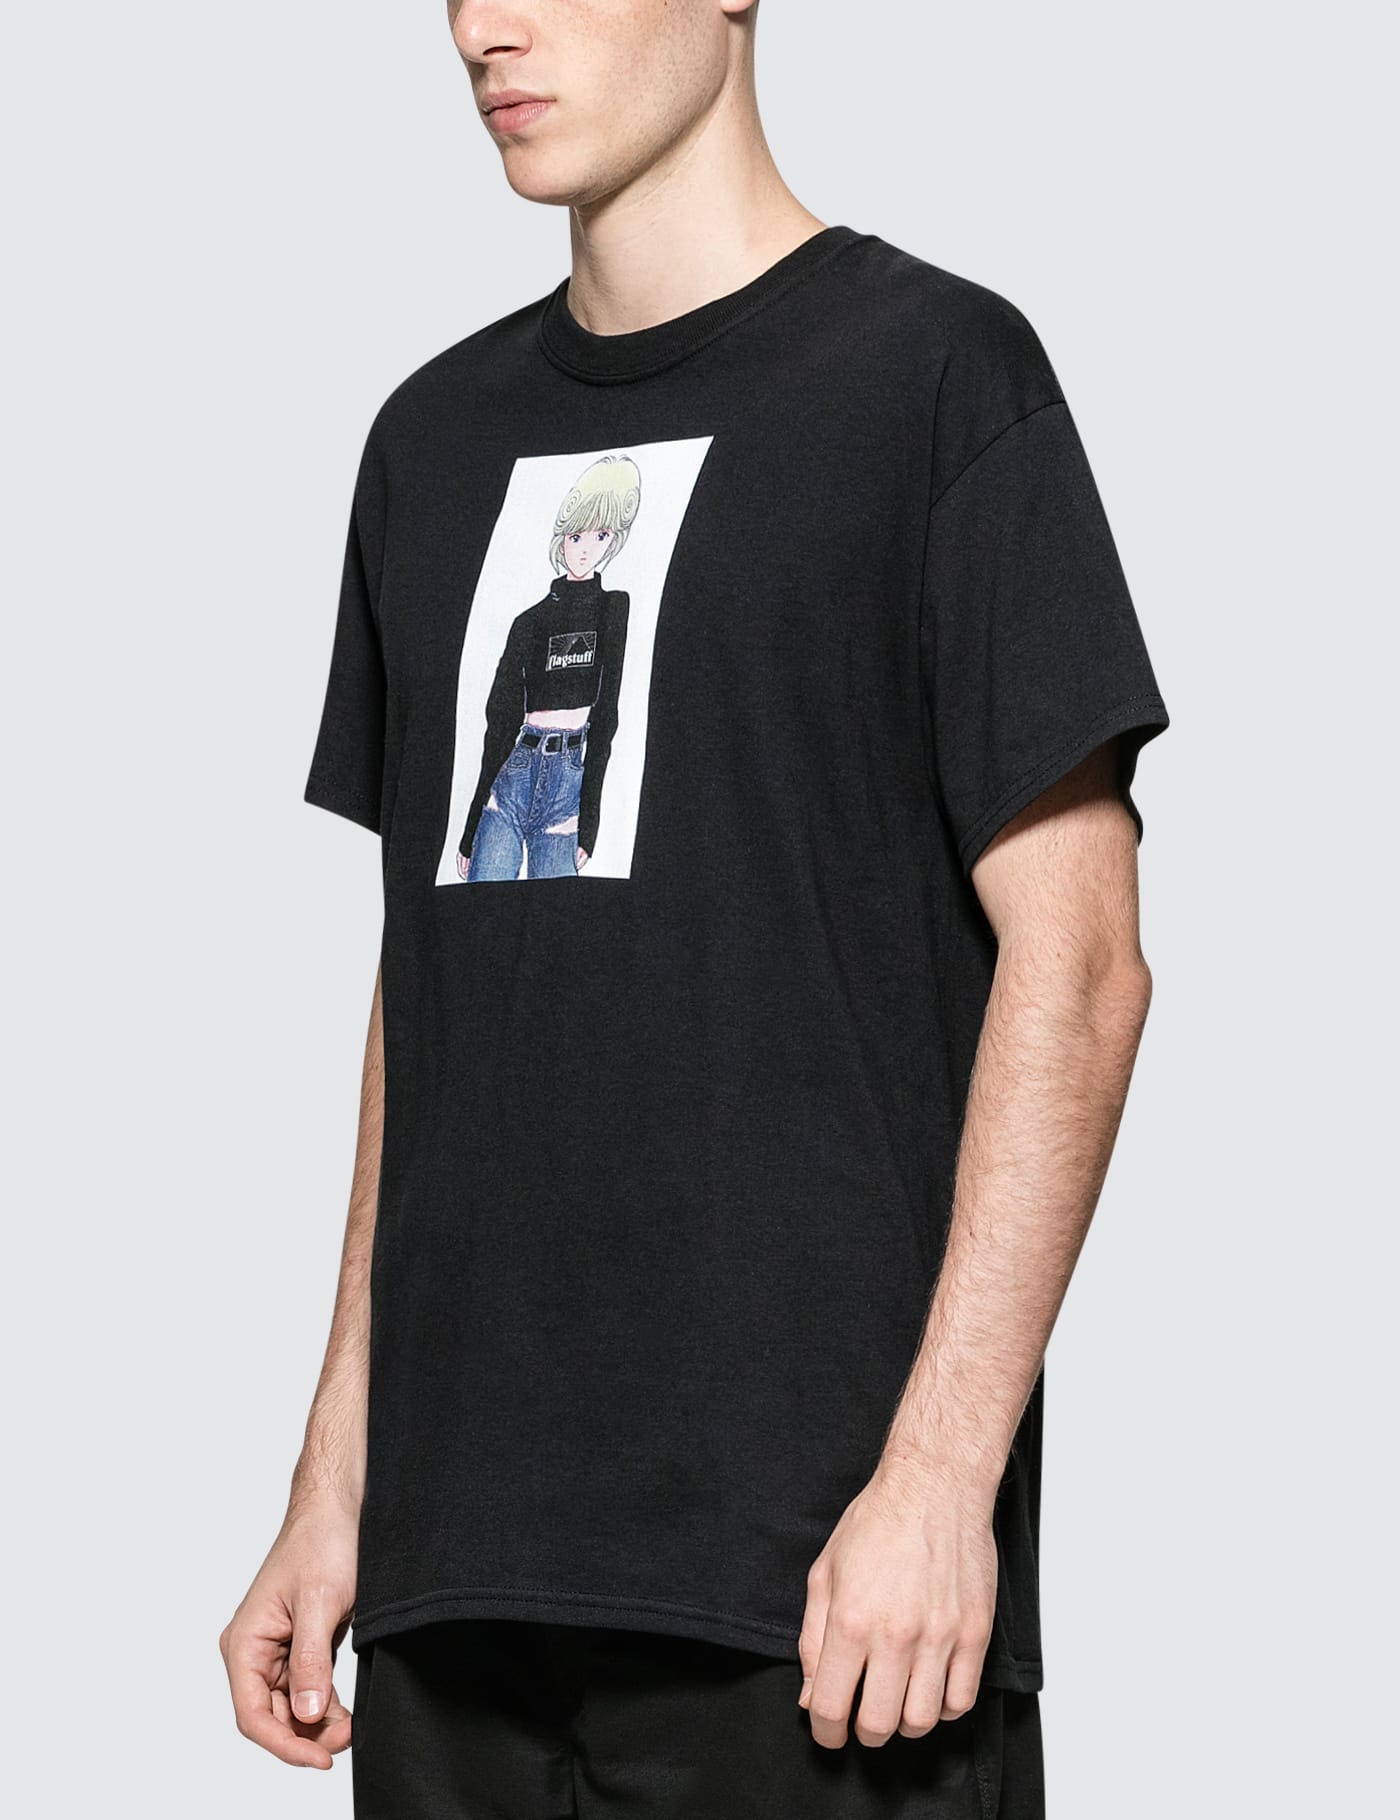 Flagstuff - T-Shirt 2 | HBX - Globally Curated Fashion and 